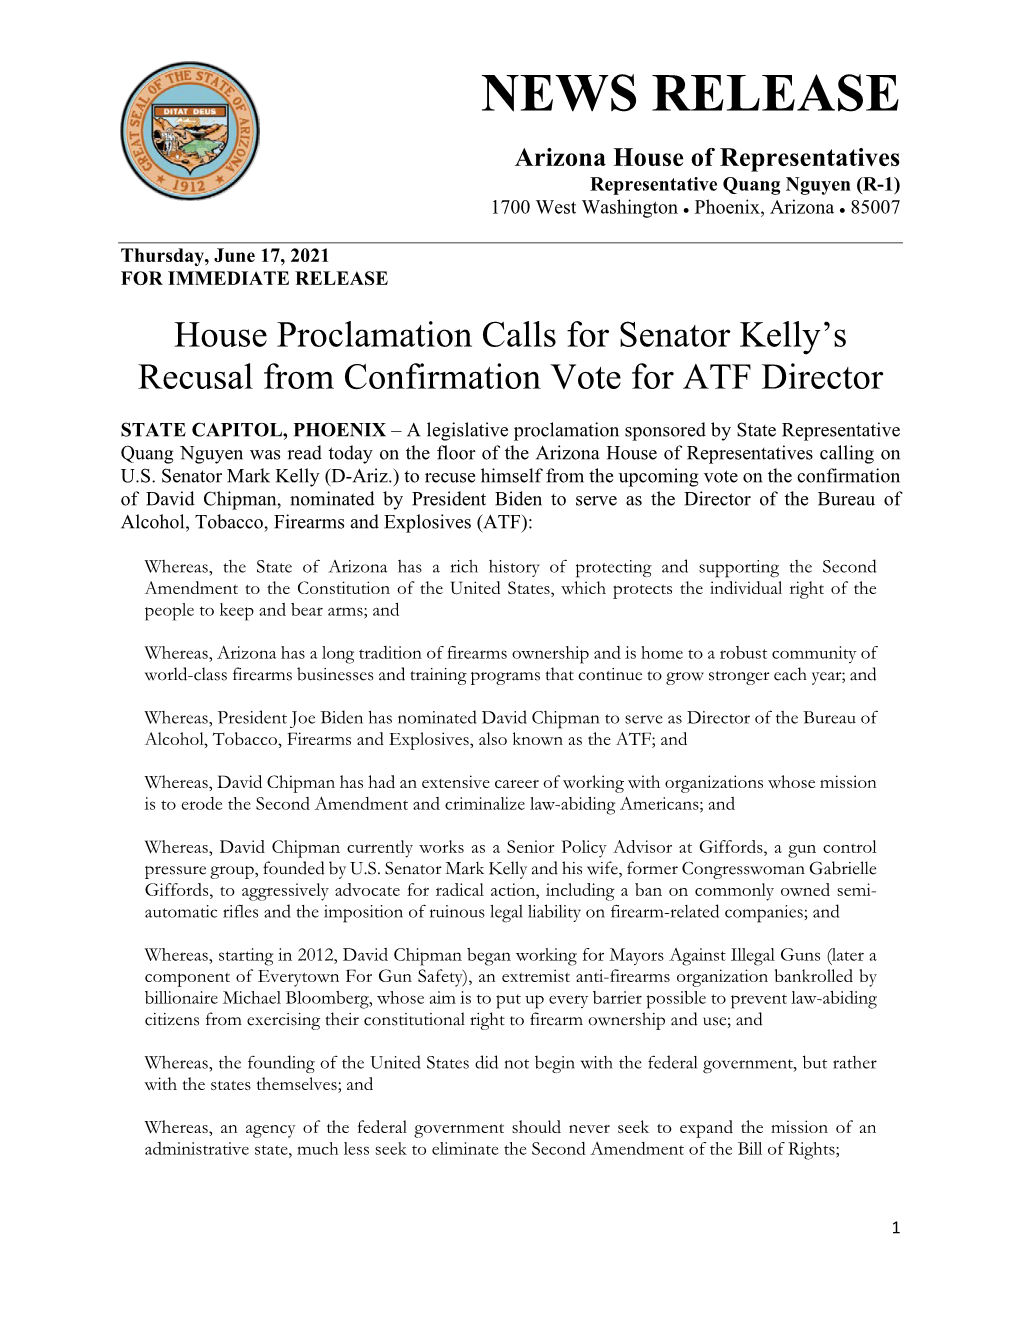 House Proclamation Calls for Senator Kelly's Recusal from Confirmation